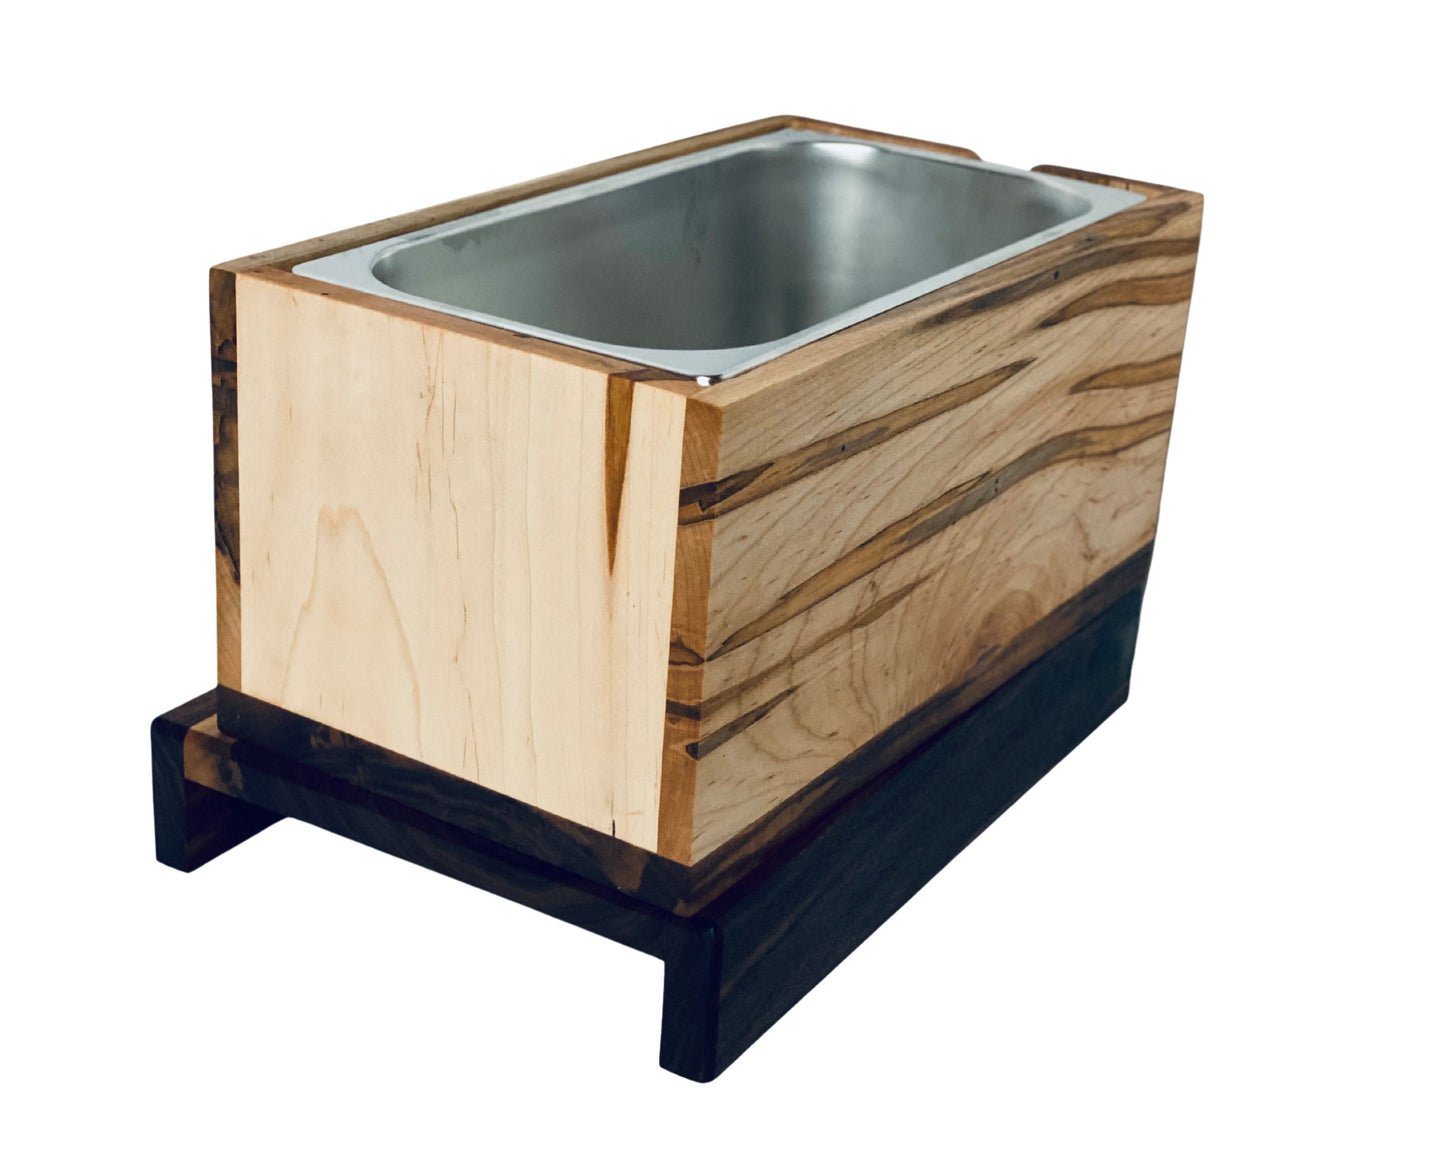 Ashland Indoor Compost Bin | Handmade Kitchen Container | Food recycling Bin for Counter or Small Drink Holder